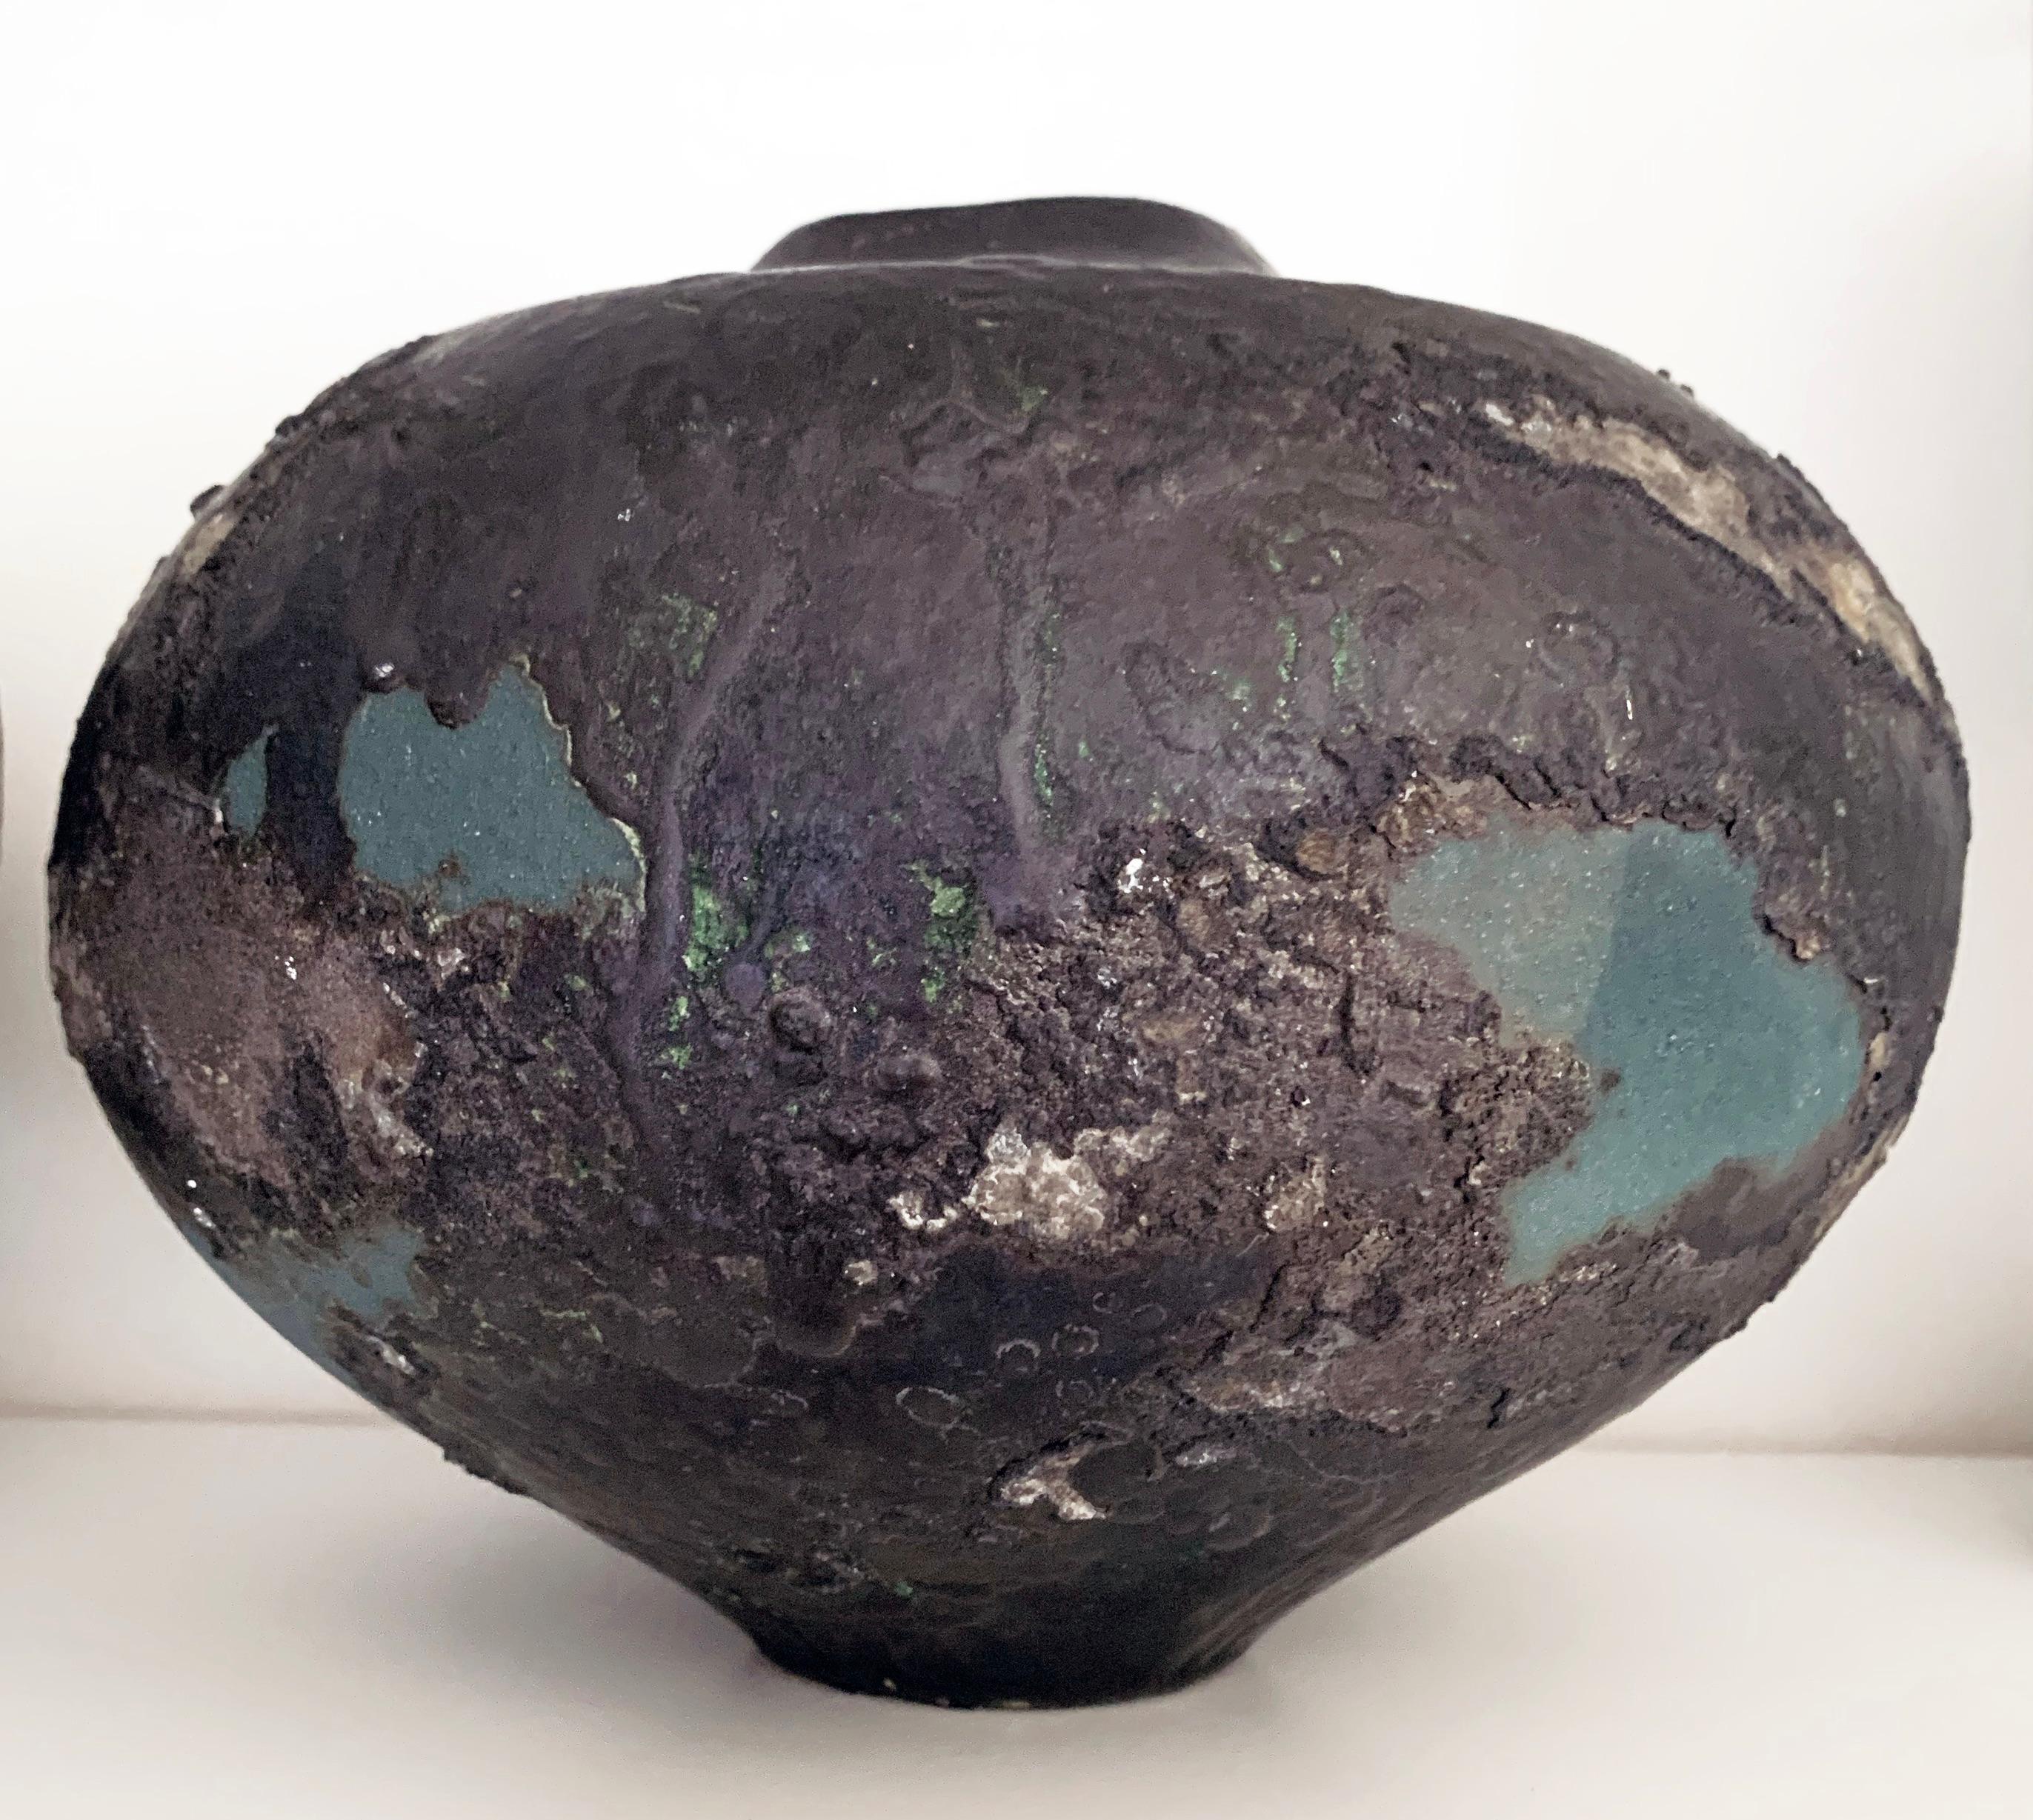 Welsh art potter Tony Evans (1942-2009) Raku Art Pottery vase, Mid-century Modern.
In addition to having an exemplary terrain composed of subtle textures and colors, this vase bears tremendous variations in its use of matte or shiny surface